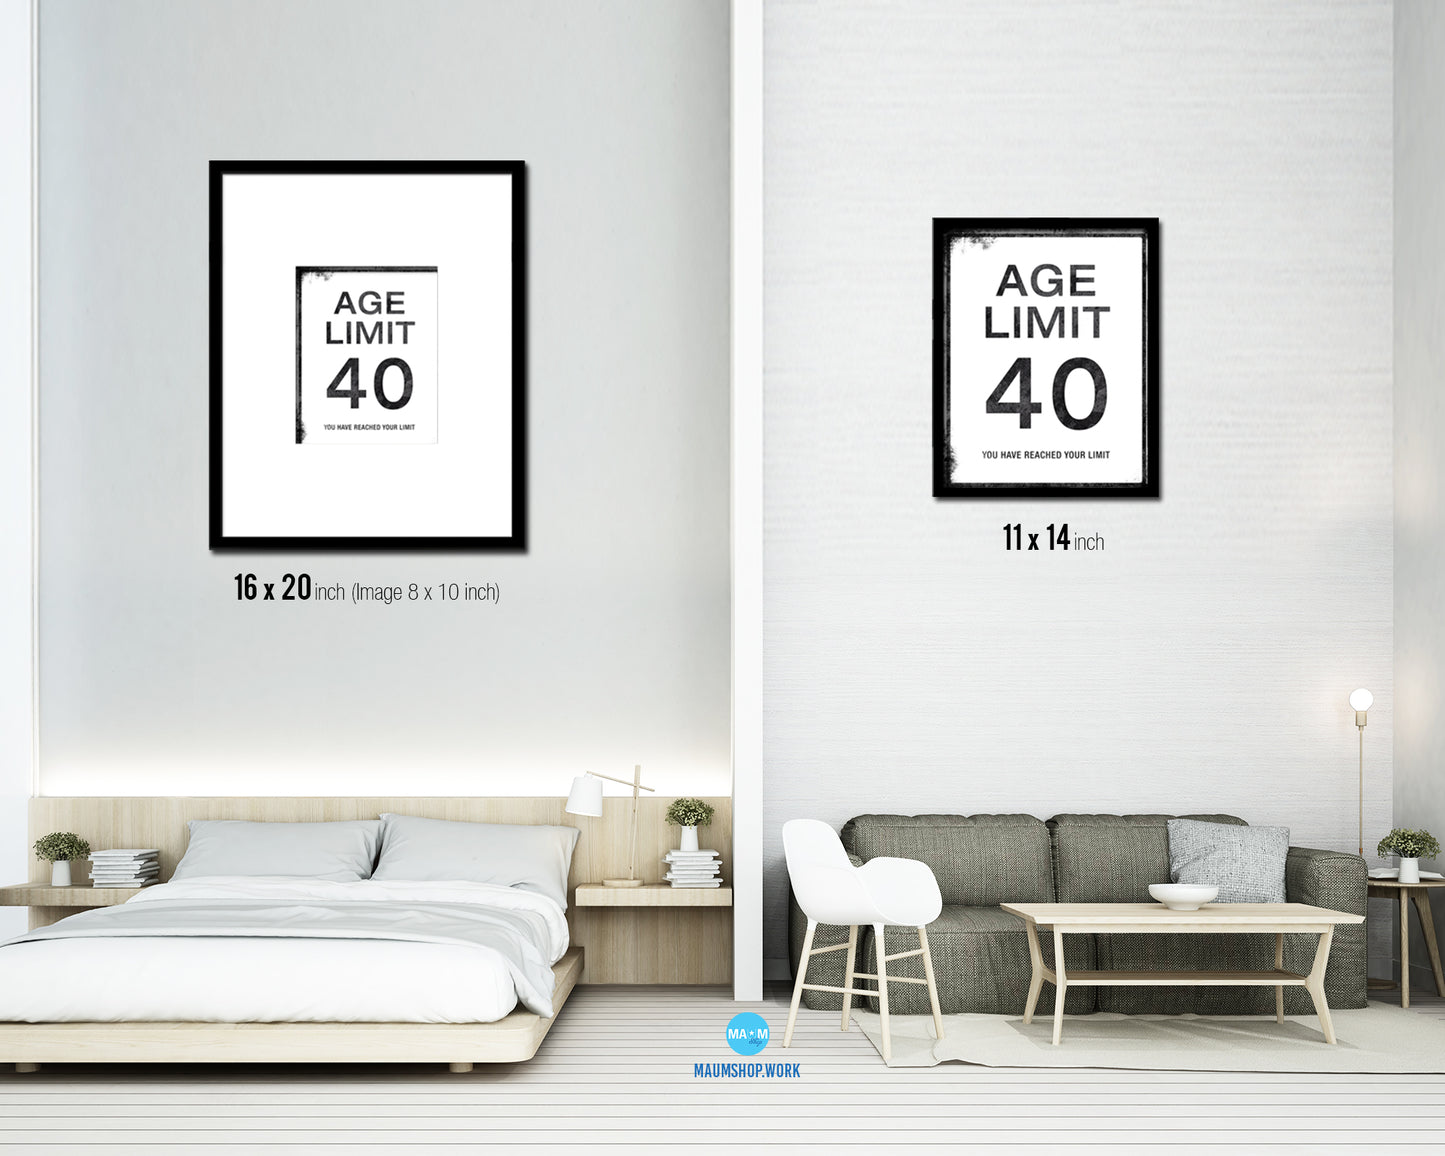 Age limit 40 you have reached your limit Notice Danger Sign Framed Print Home Decor Wall Art Gifts